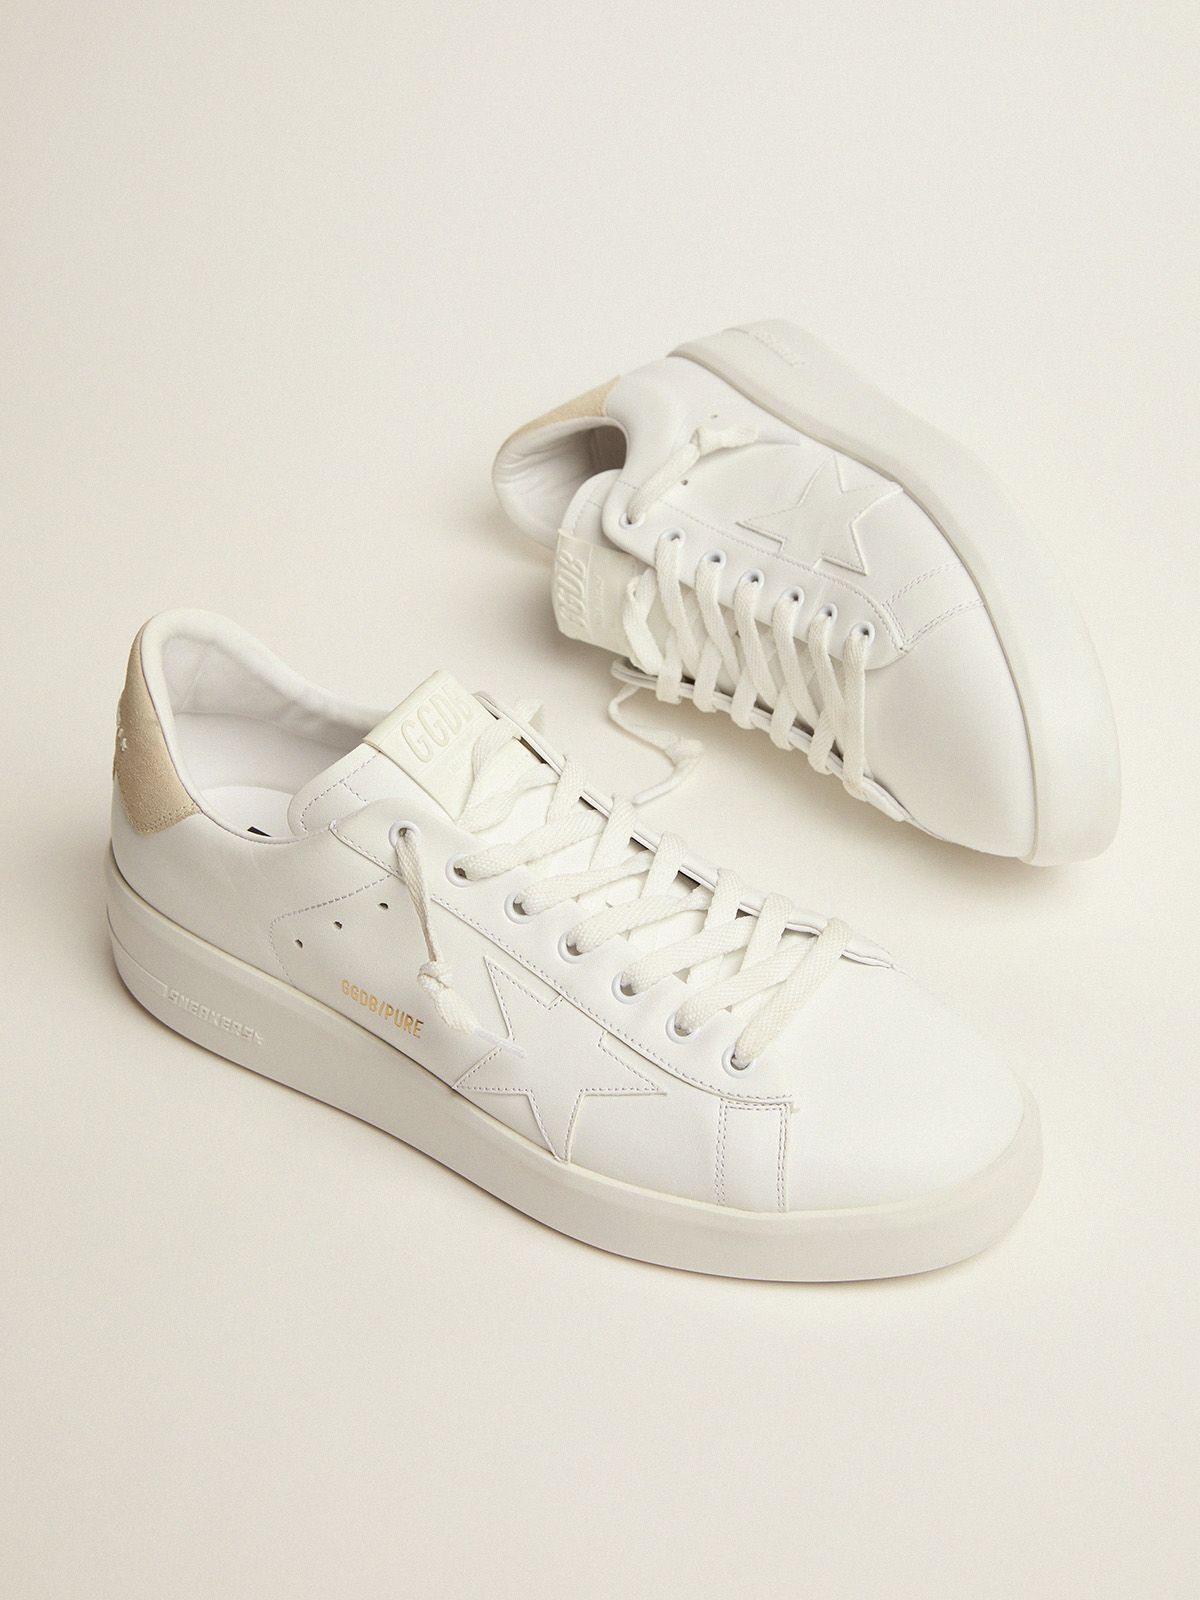 Purestar sneakers in white leather with cream suede heel tab 